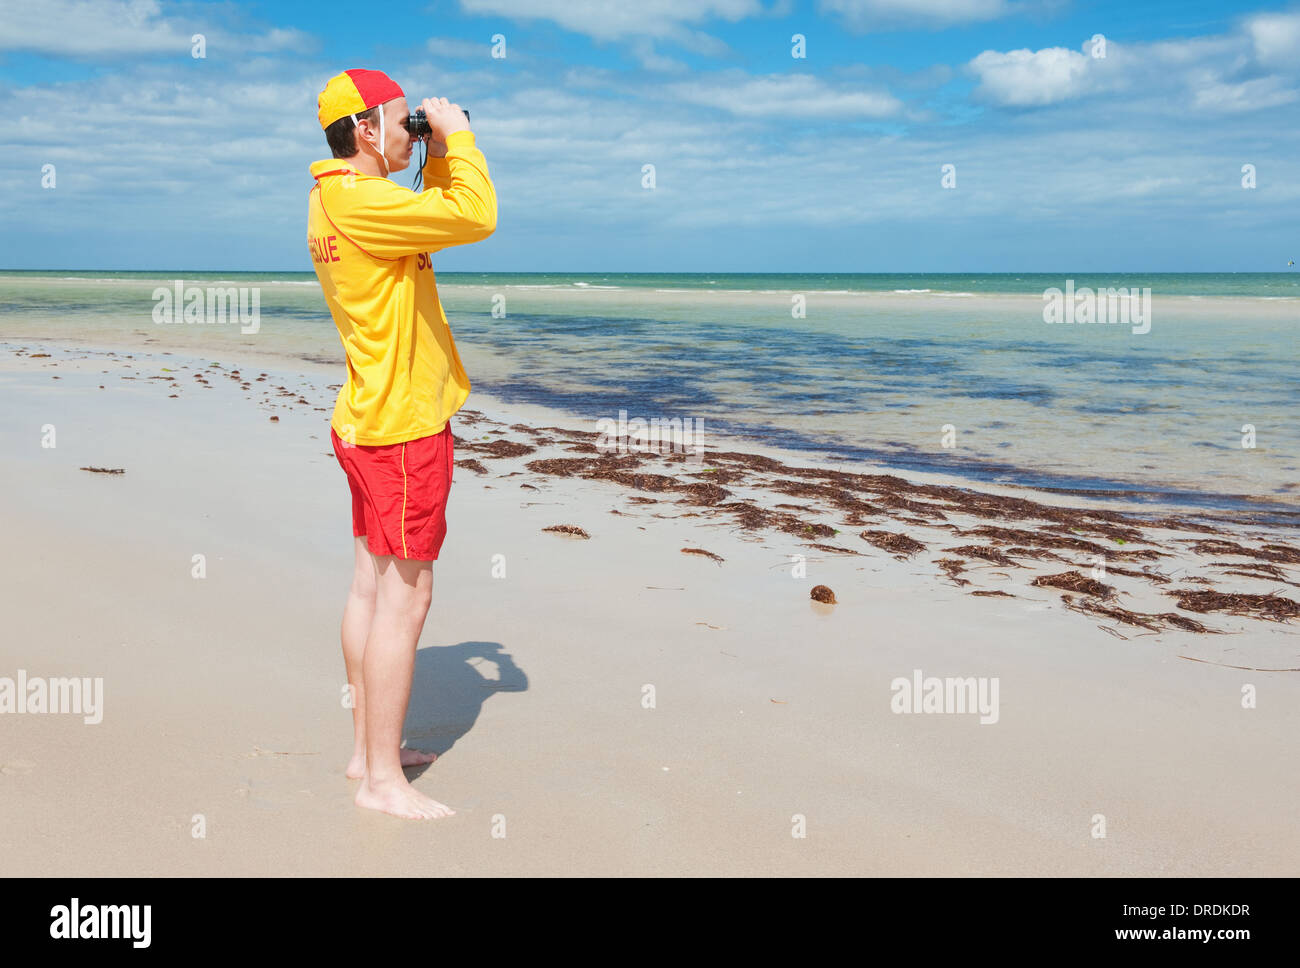 young man life saver watching the situation on the sea Stock Photo